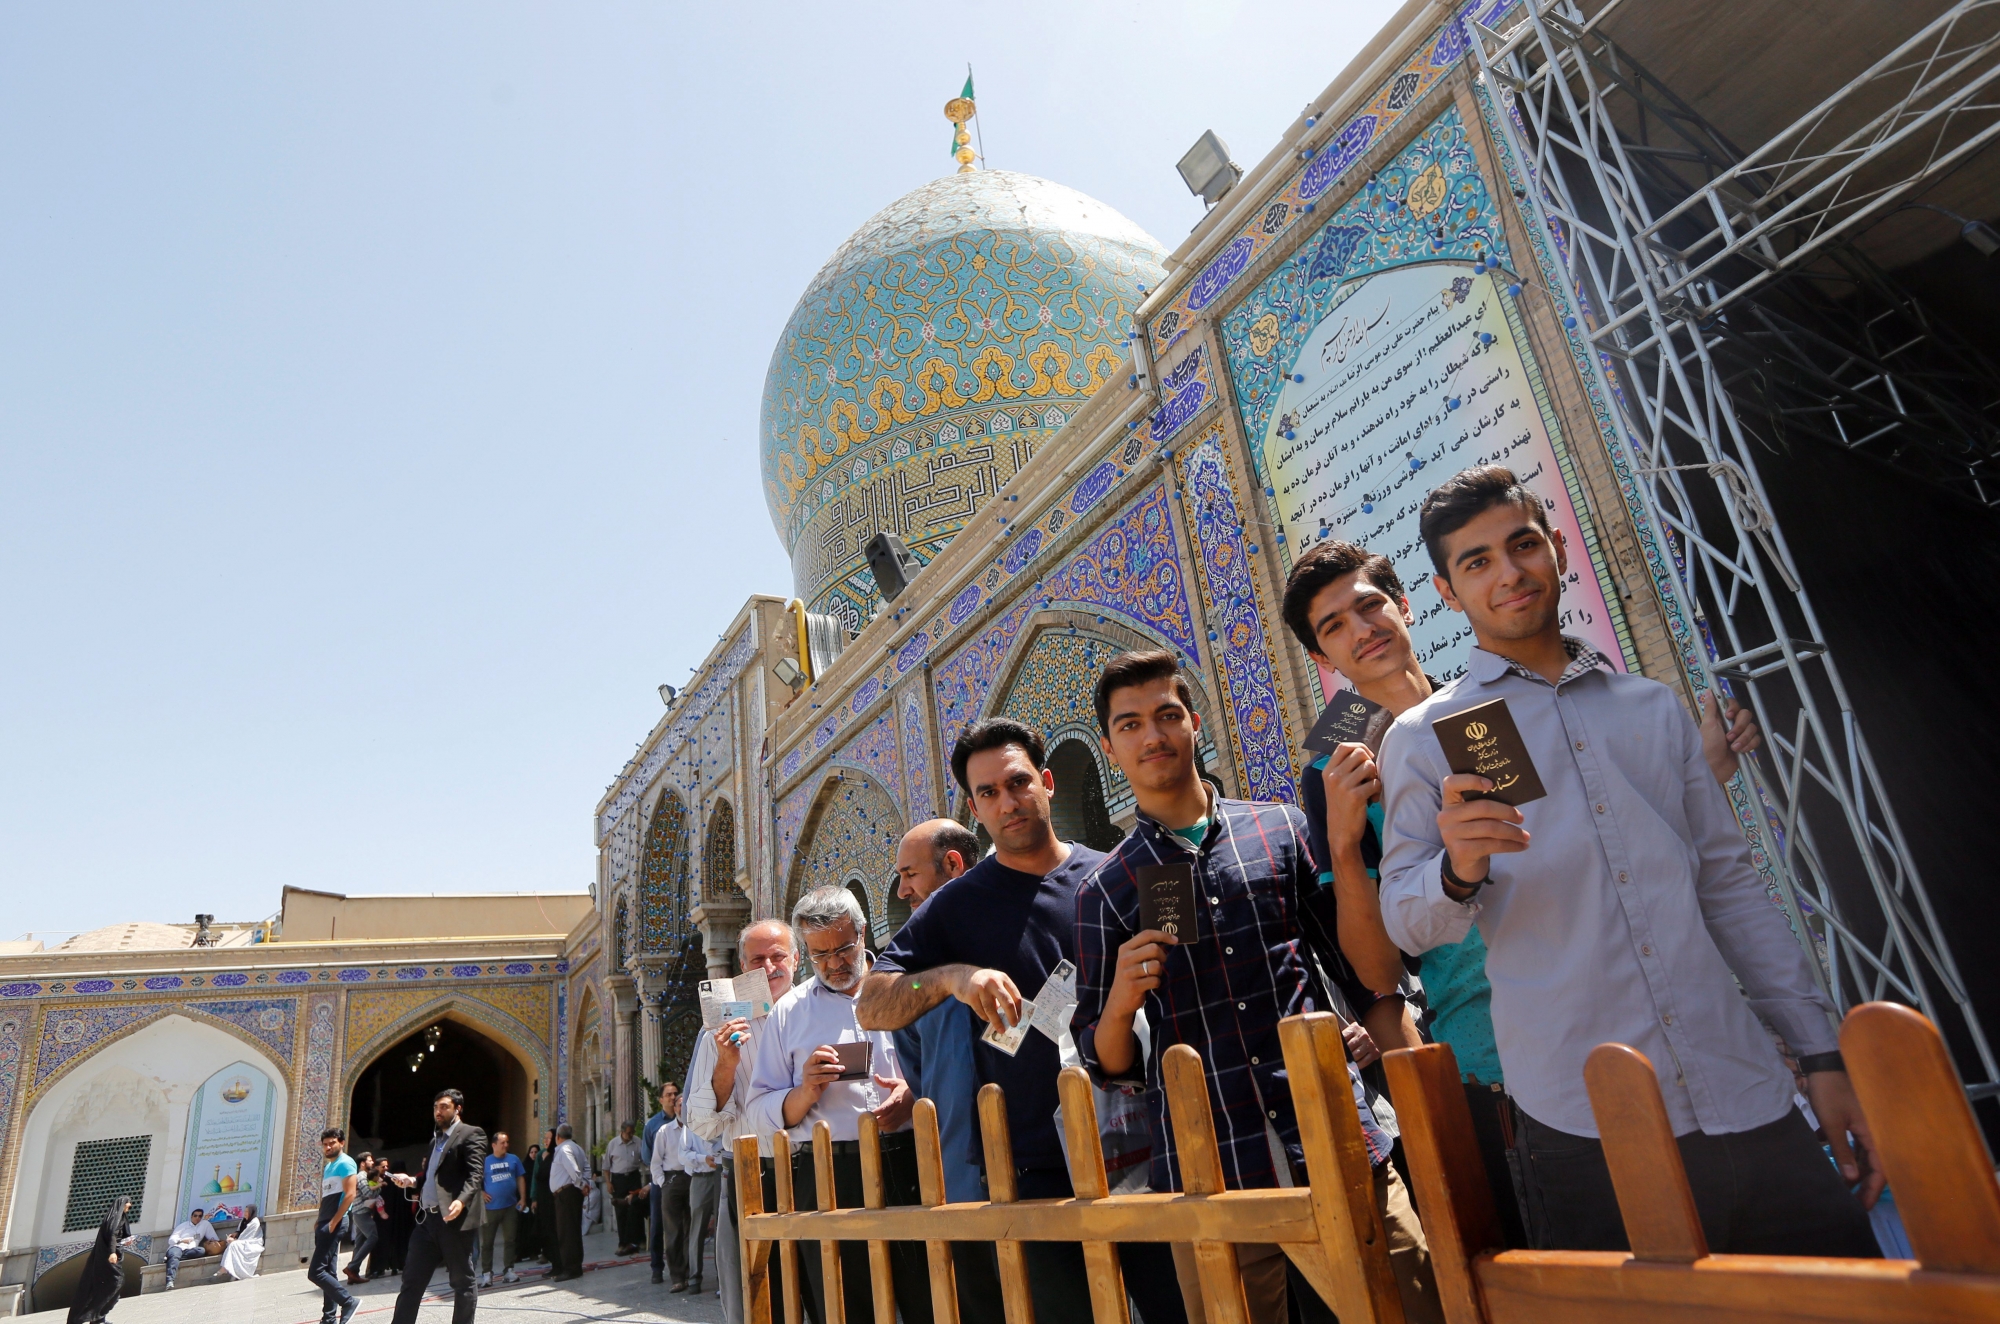 epa05973674 Iranian men waits in line to cast their ballots in the Iranian presidential elections at a polling station set up at the Abdol Azim shrine in the city of Shahre-Ray, south of the capital of Tehran, Iran, 19 May 2017. Out of the group of candidates, the race is tightest between frontrunners Iranian current president Hassan Rouhani and his conservative challenger Ebrahim Raisi.  EPA/ABEDIN TAHERKENAREH IRAN ELECTIONS